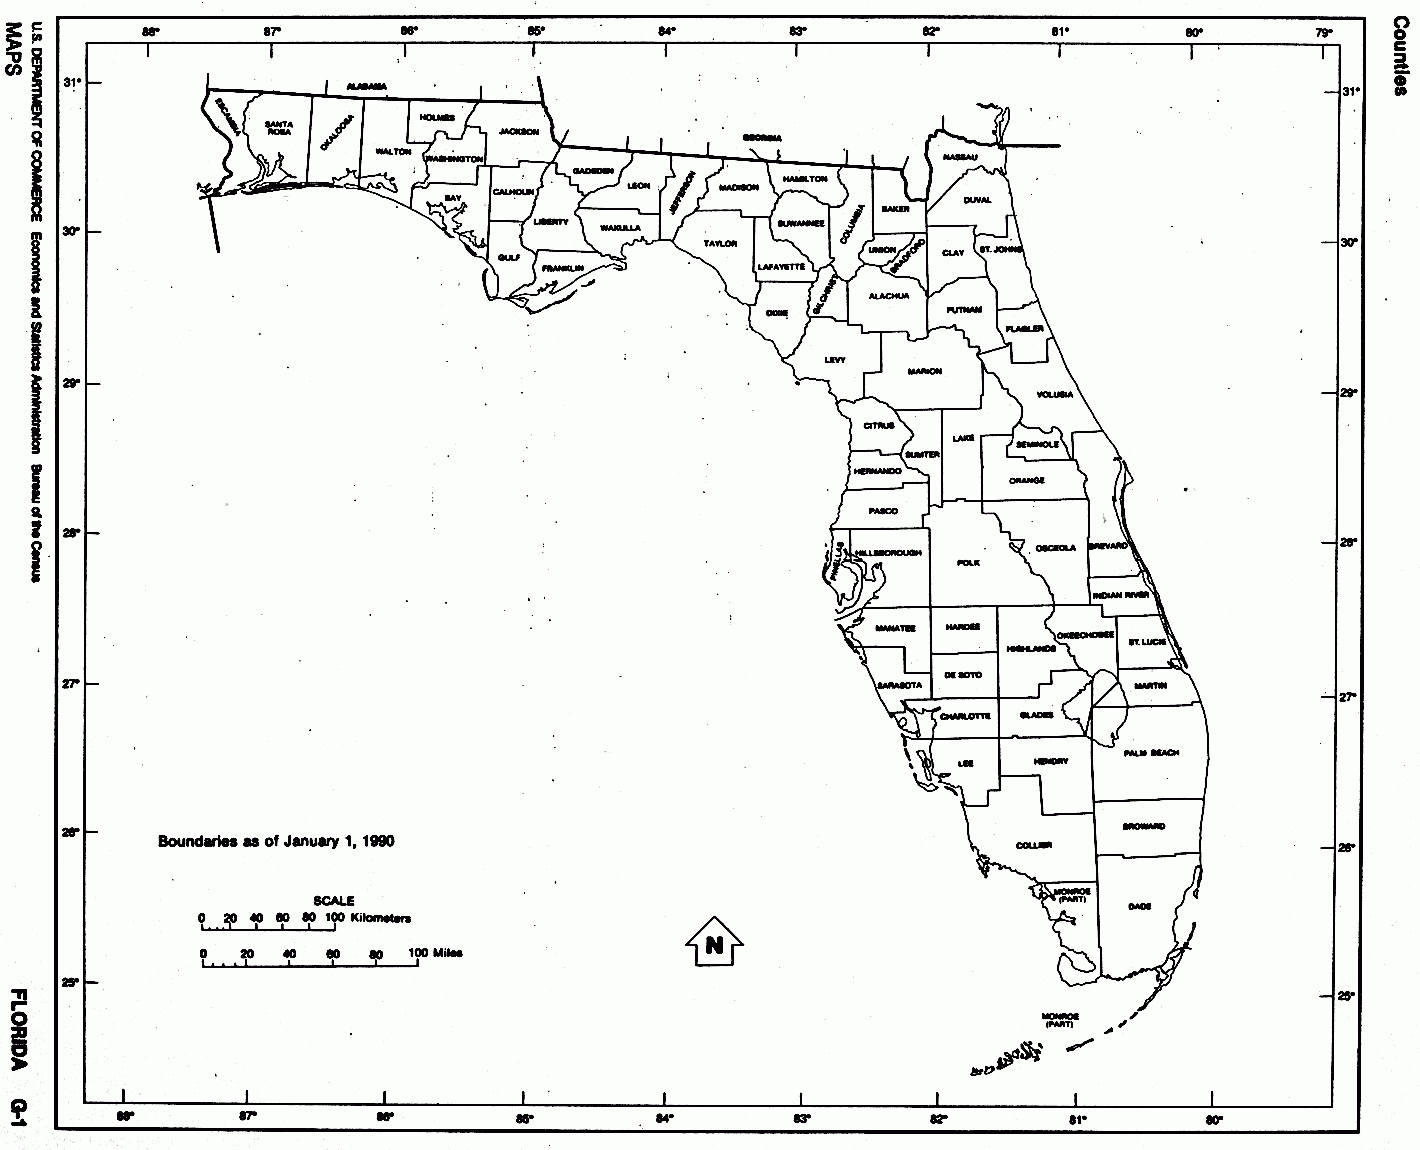 Florida Maps - Perry-Castañeda Map Collection - Ut Library Online - Florida Map Black And White